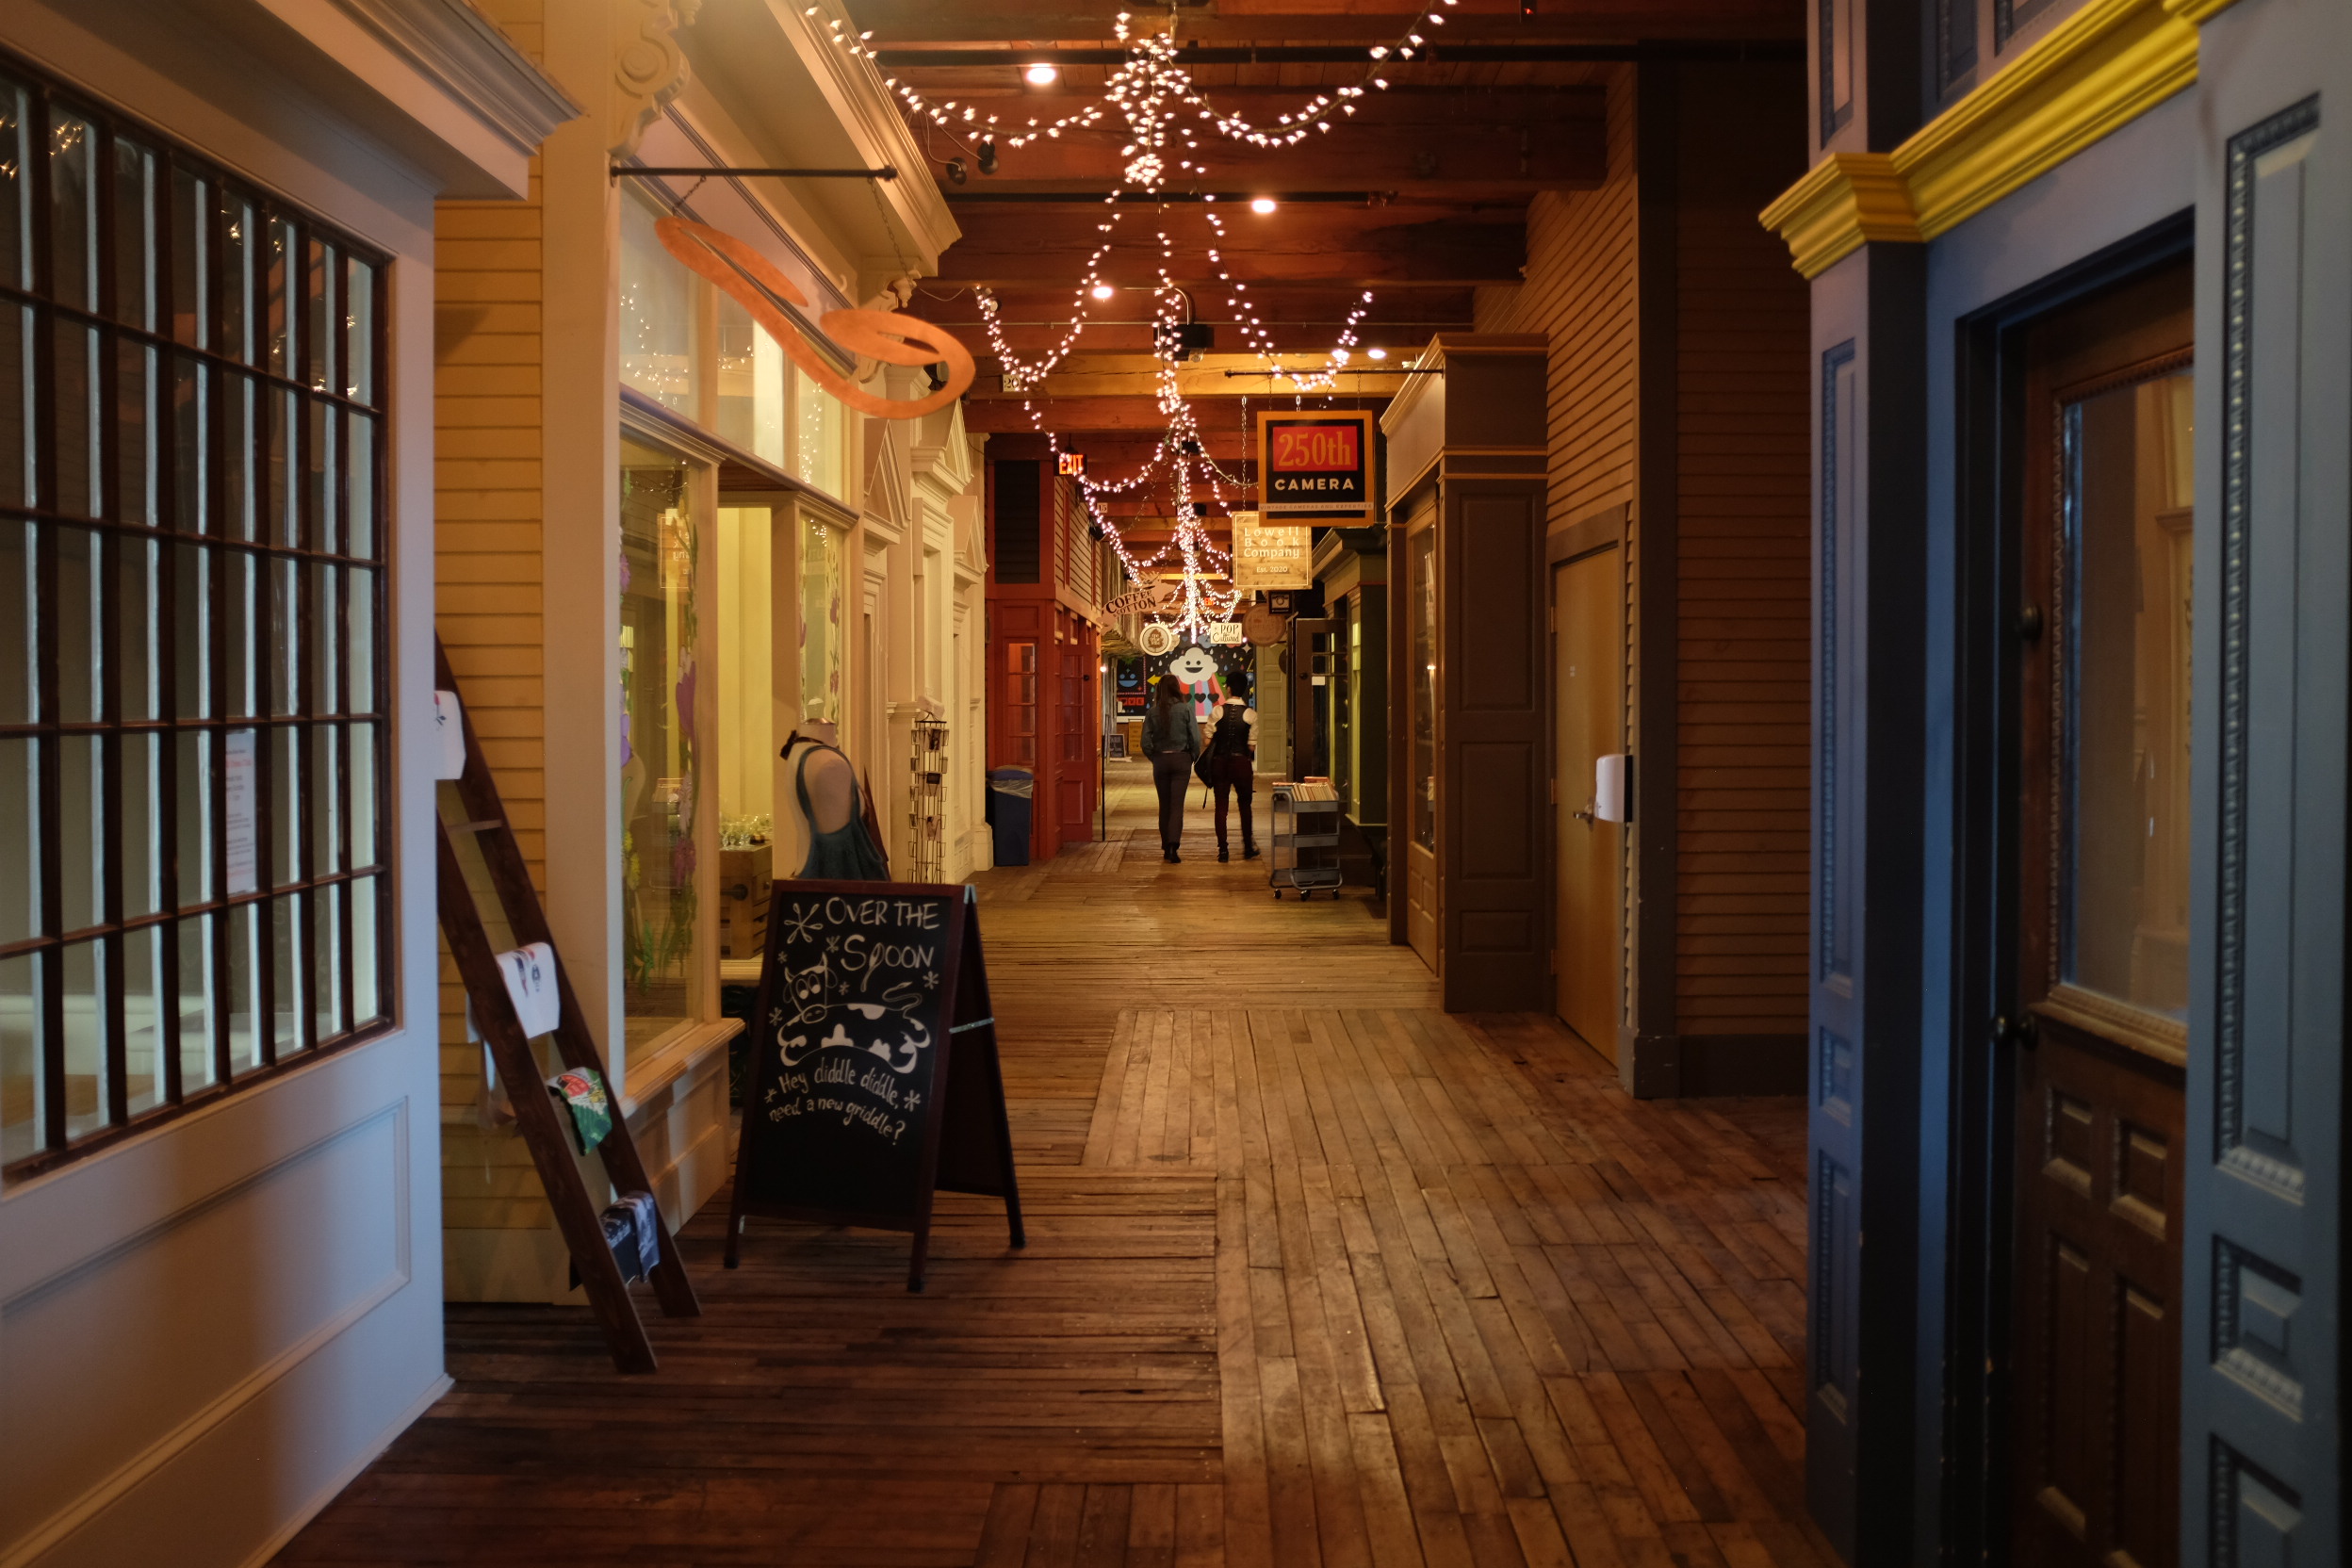 A photo taken down a hallway lined with old-fashioned storefronts and lit by incandescent string lights hanging from the ceiling; Two people are walking away from the camera.